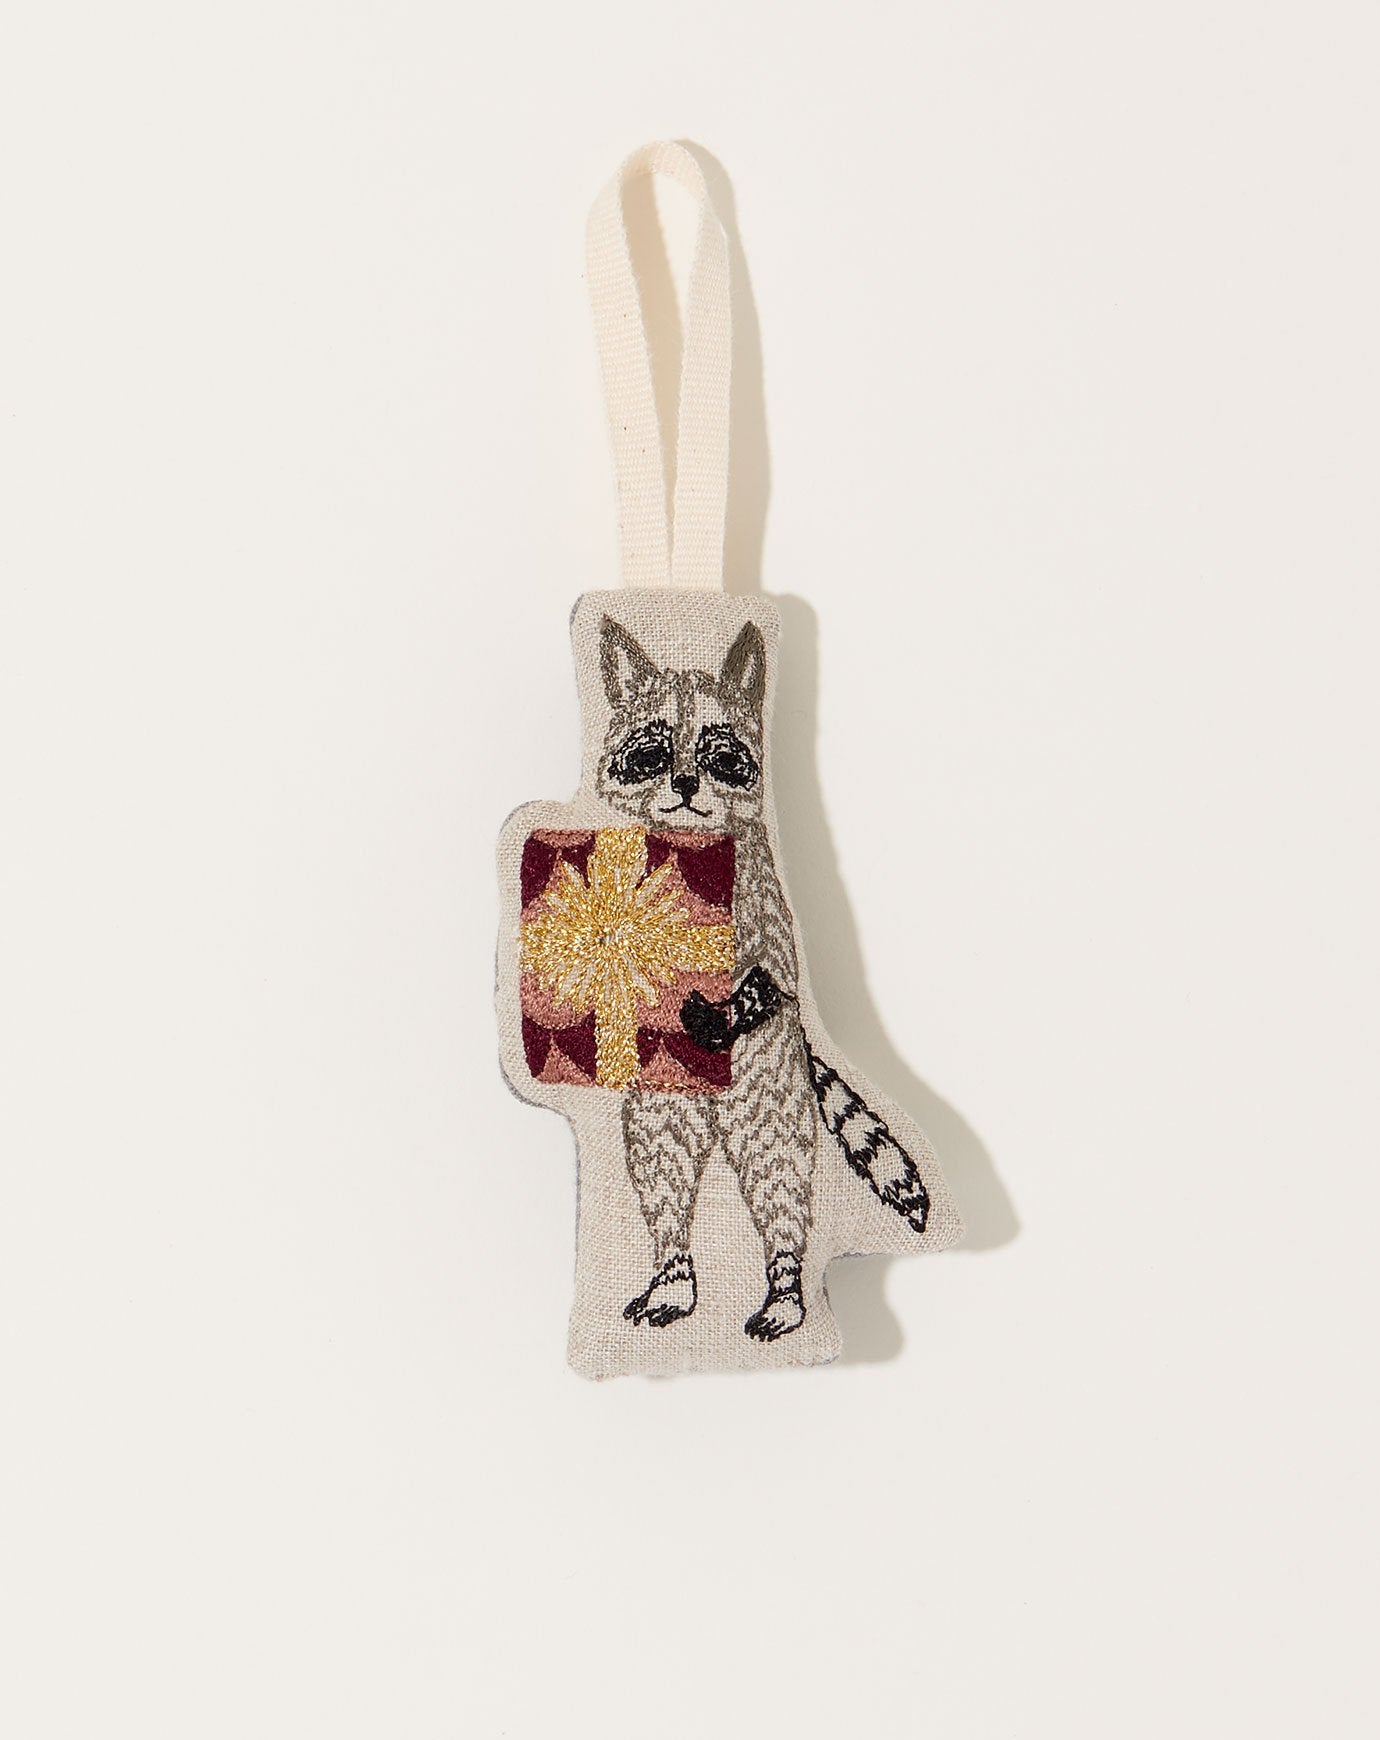 Coral & Tusk Raccoon with Present Ornament